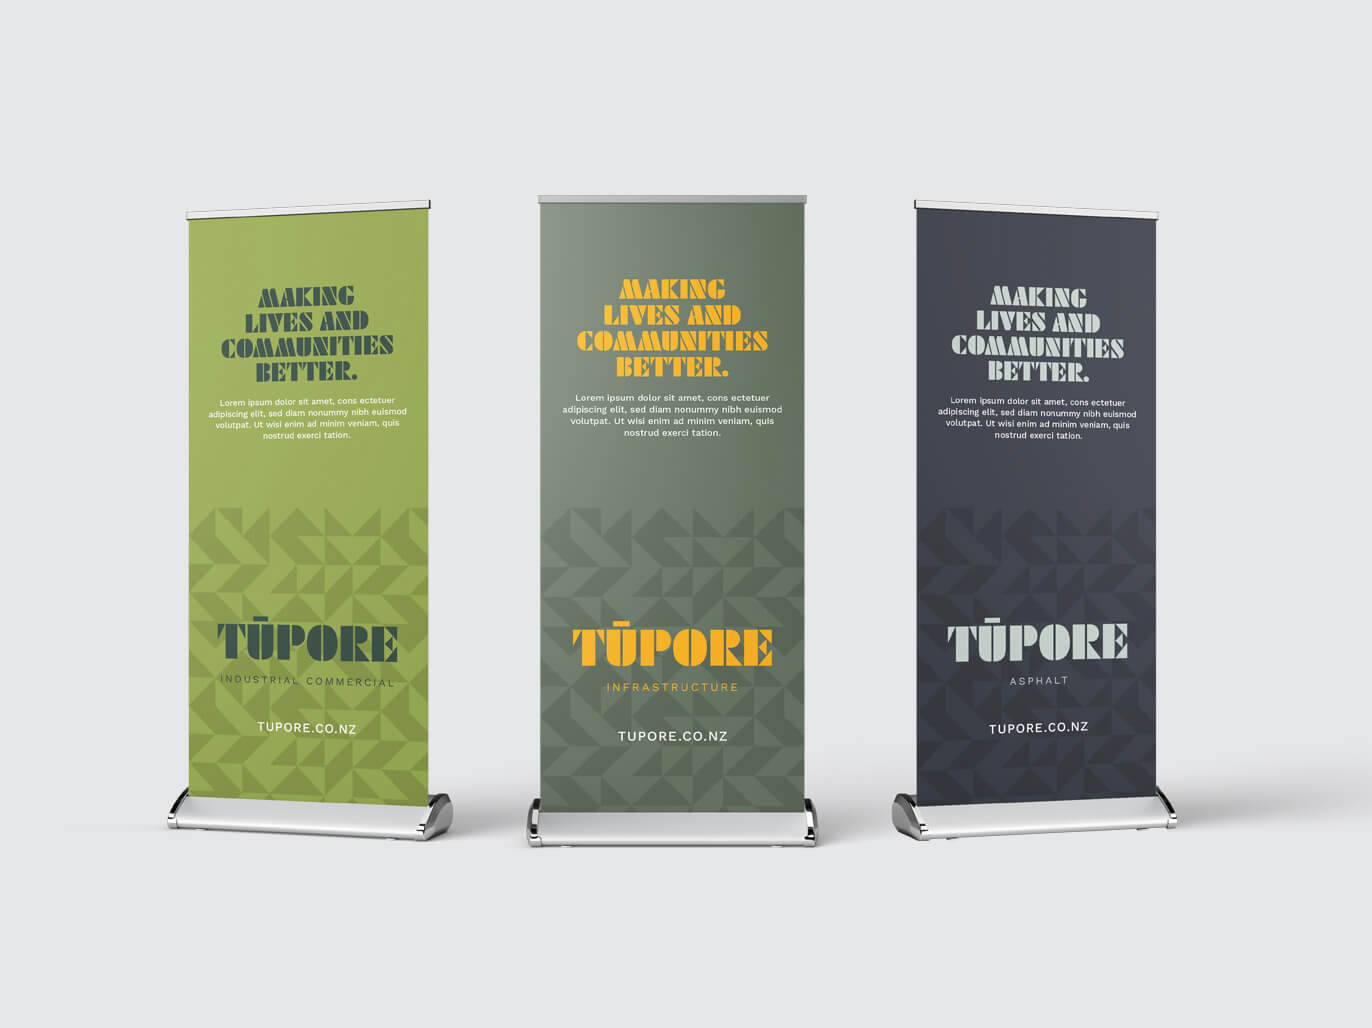 Many-Hats-Tupore-infrastructure-pull-up-banners